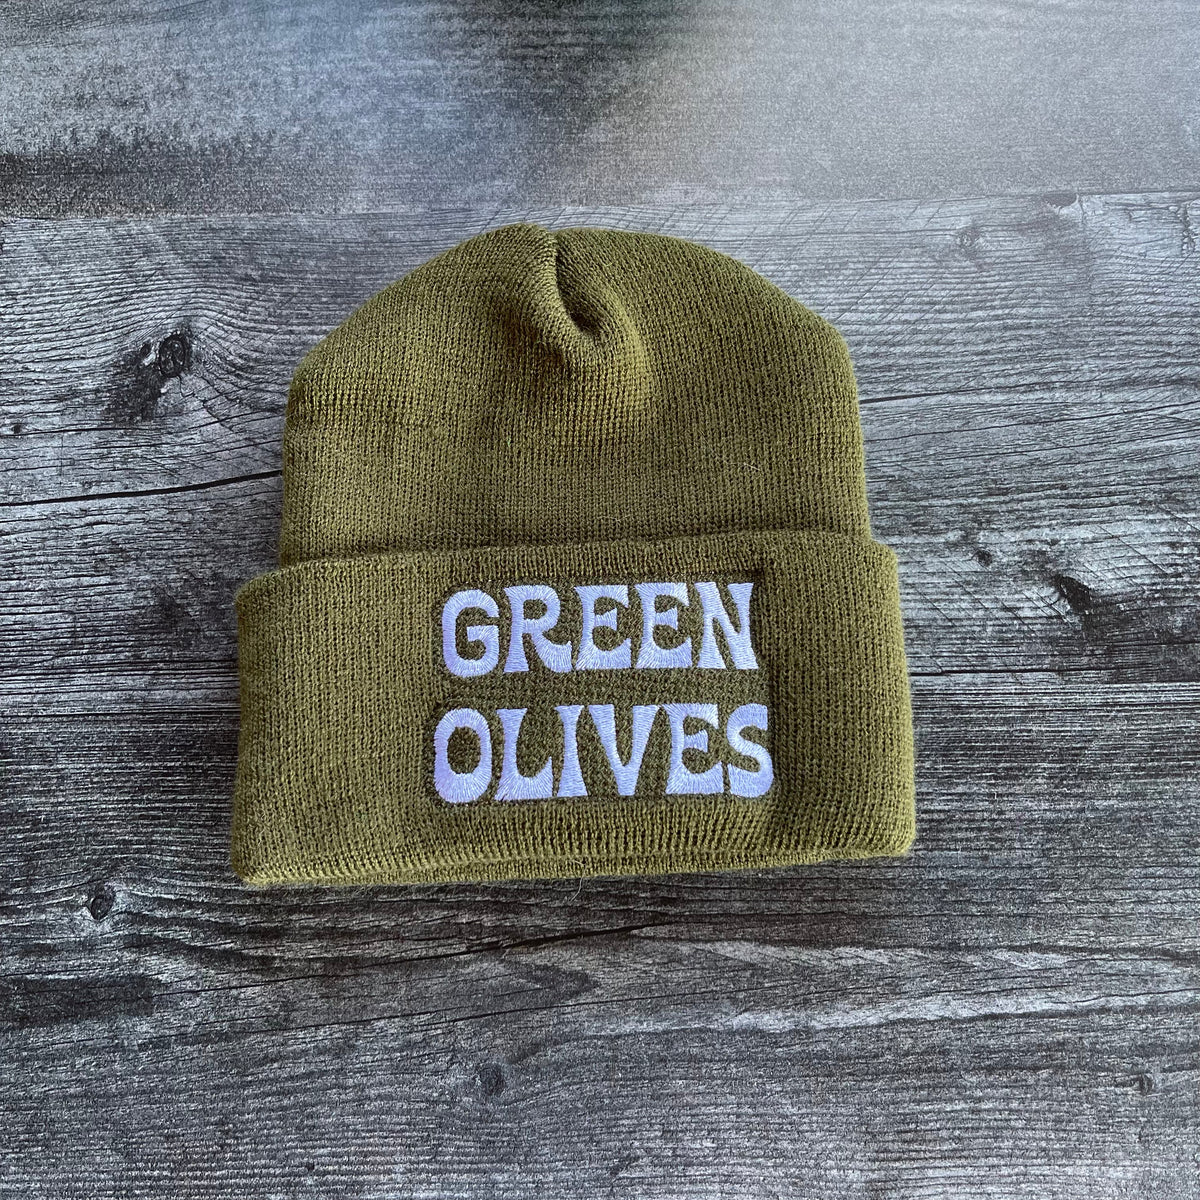 Silver made the // – Spider USA in Green Olives Beanie The